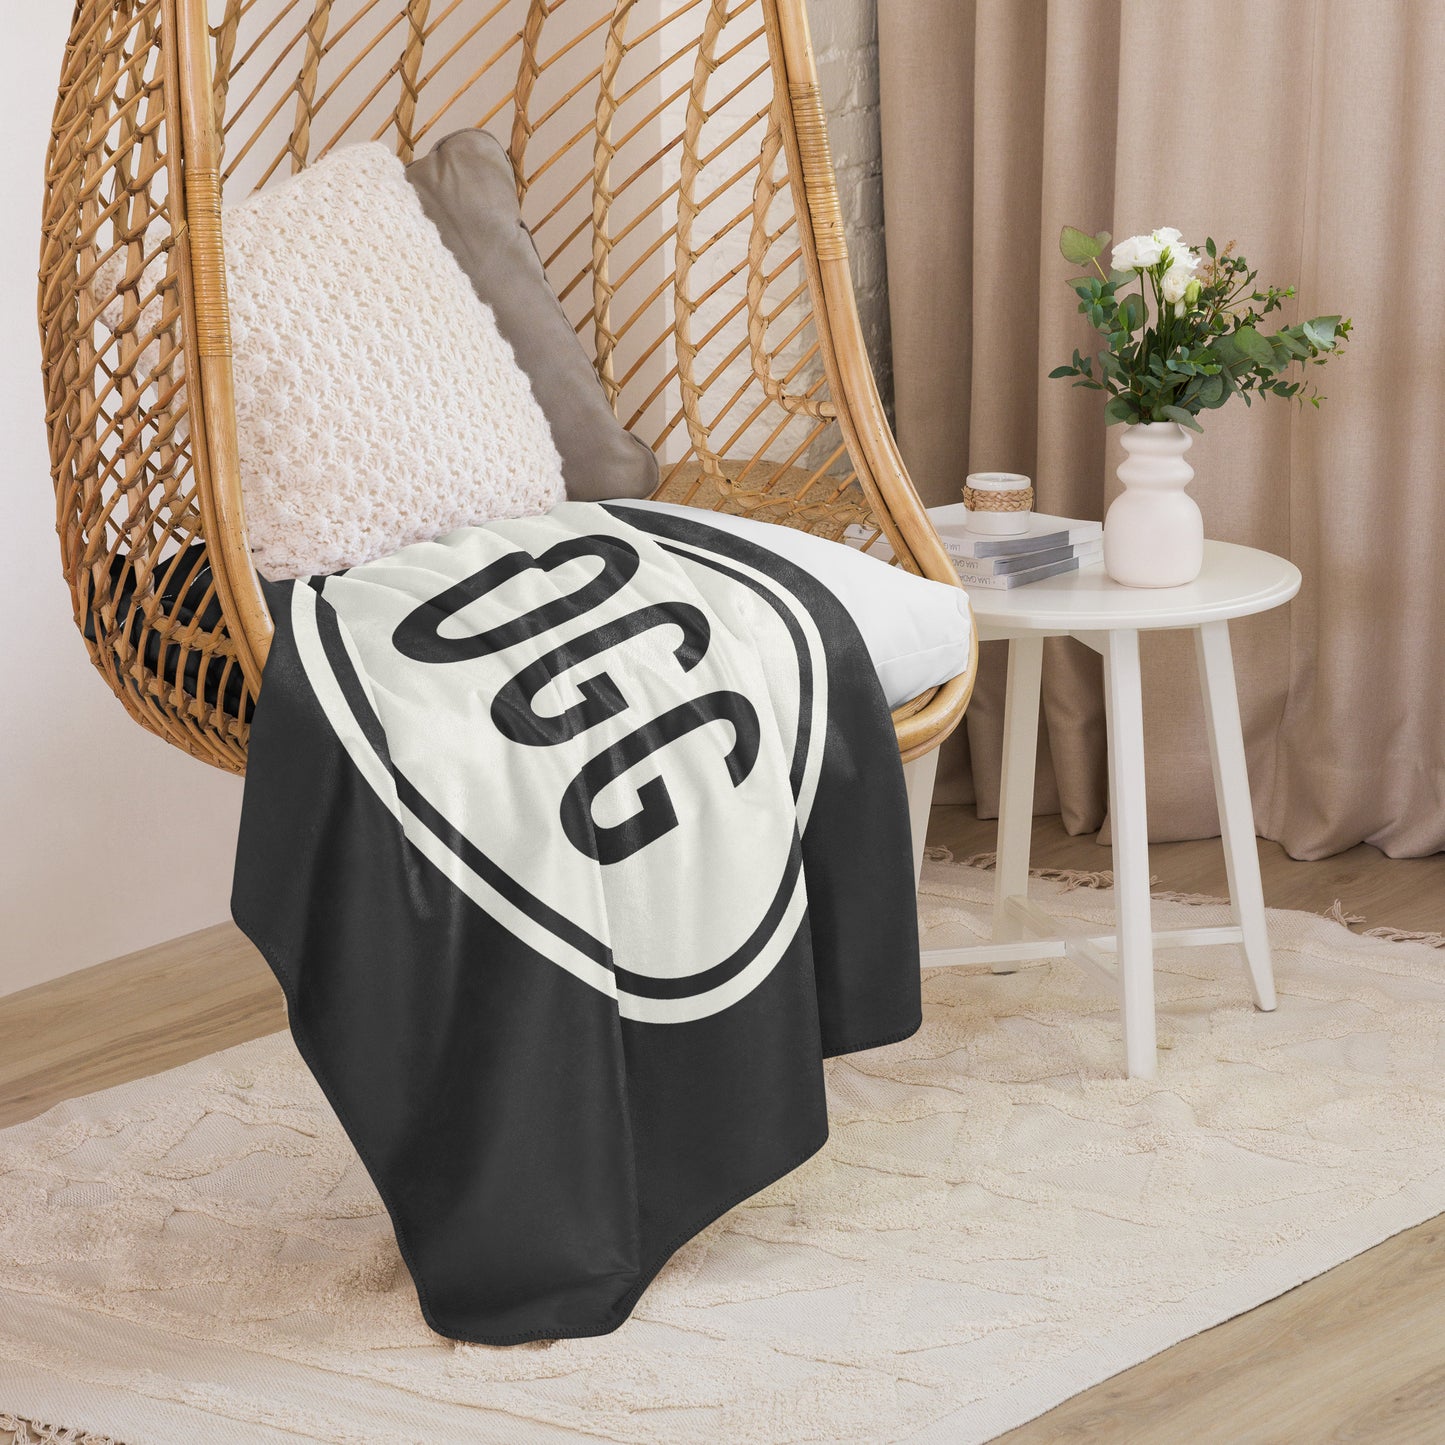 Unique Travel Gift Sherpa Blanket - White Oval • OGG Maui • YHM Designs - Image 06